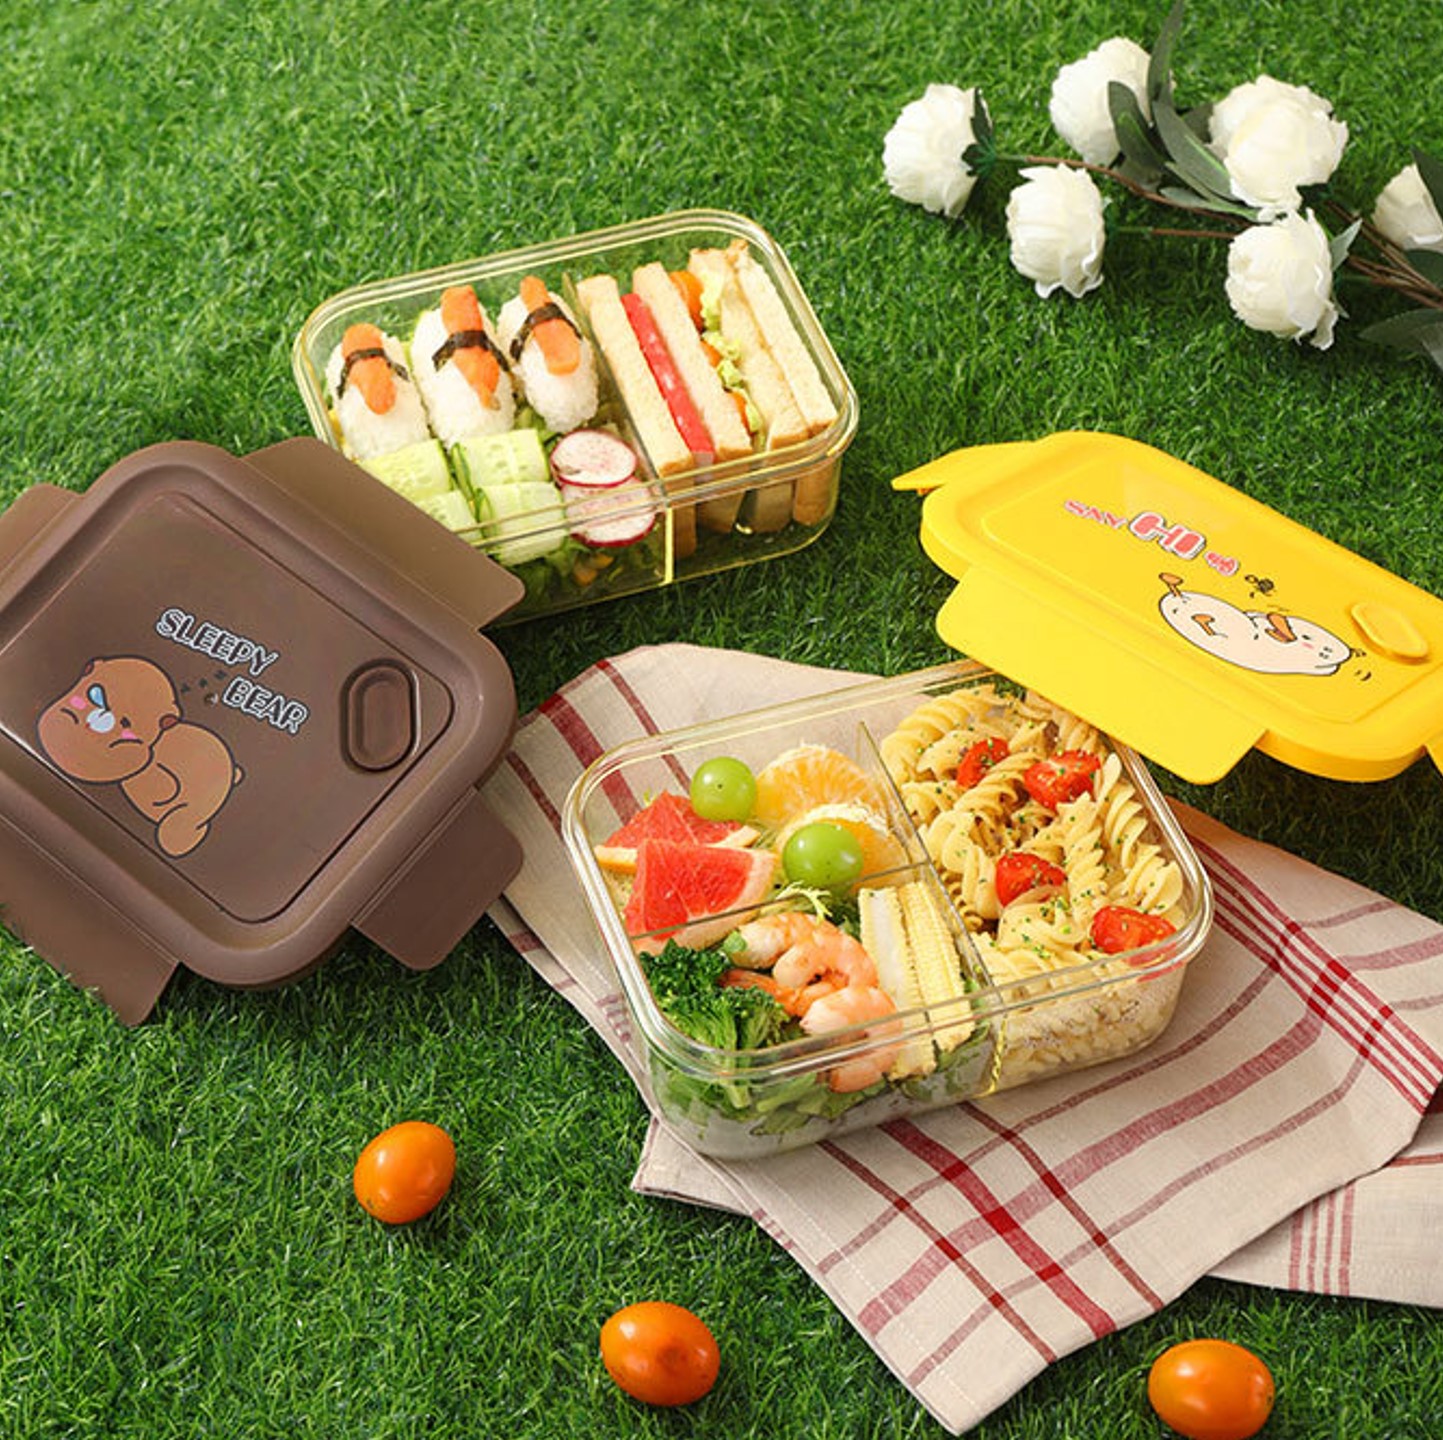 Microwavable Lunch box